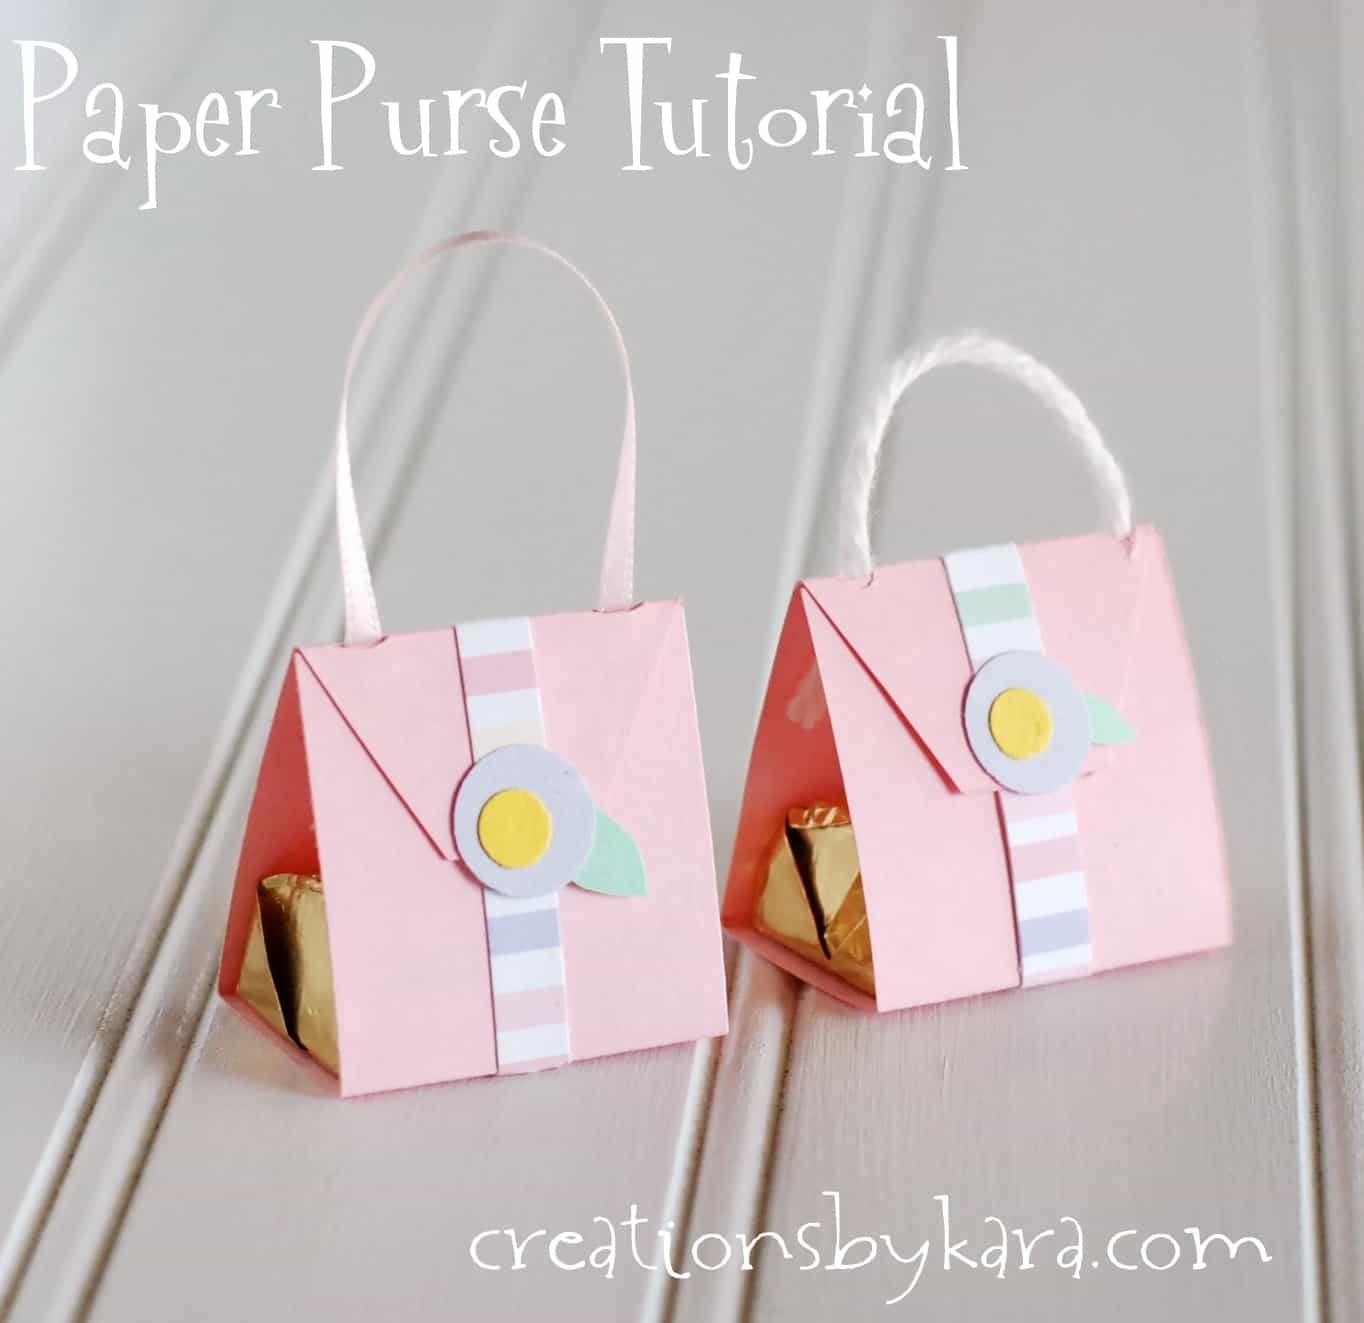 How to make A Hershey Purse for Party Favors, Invitations or Gifts